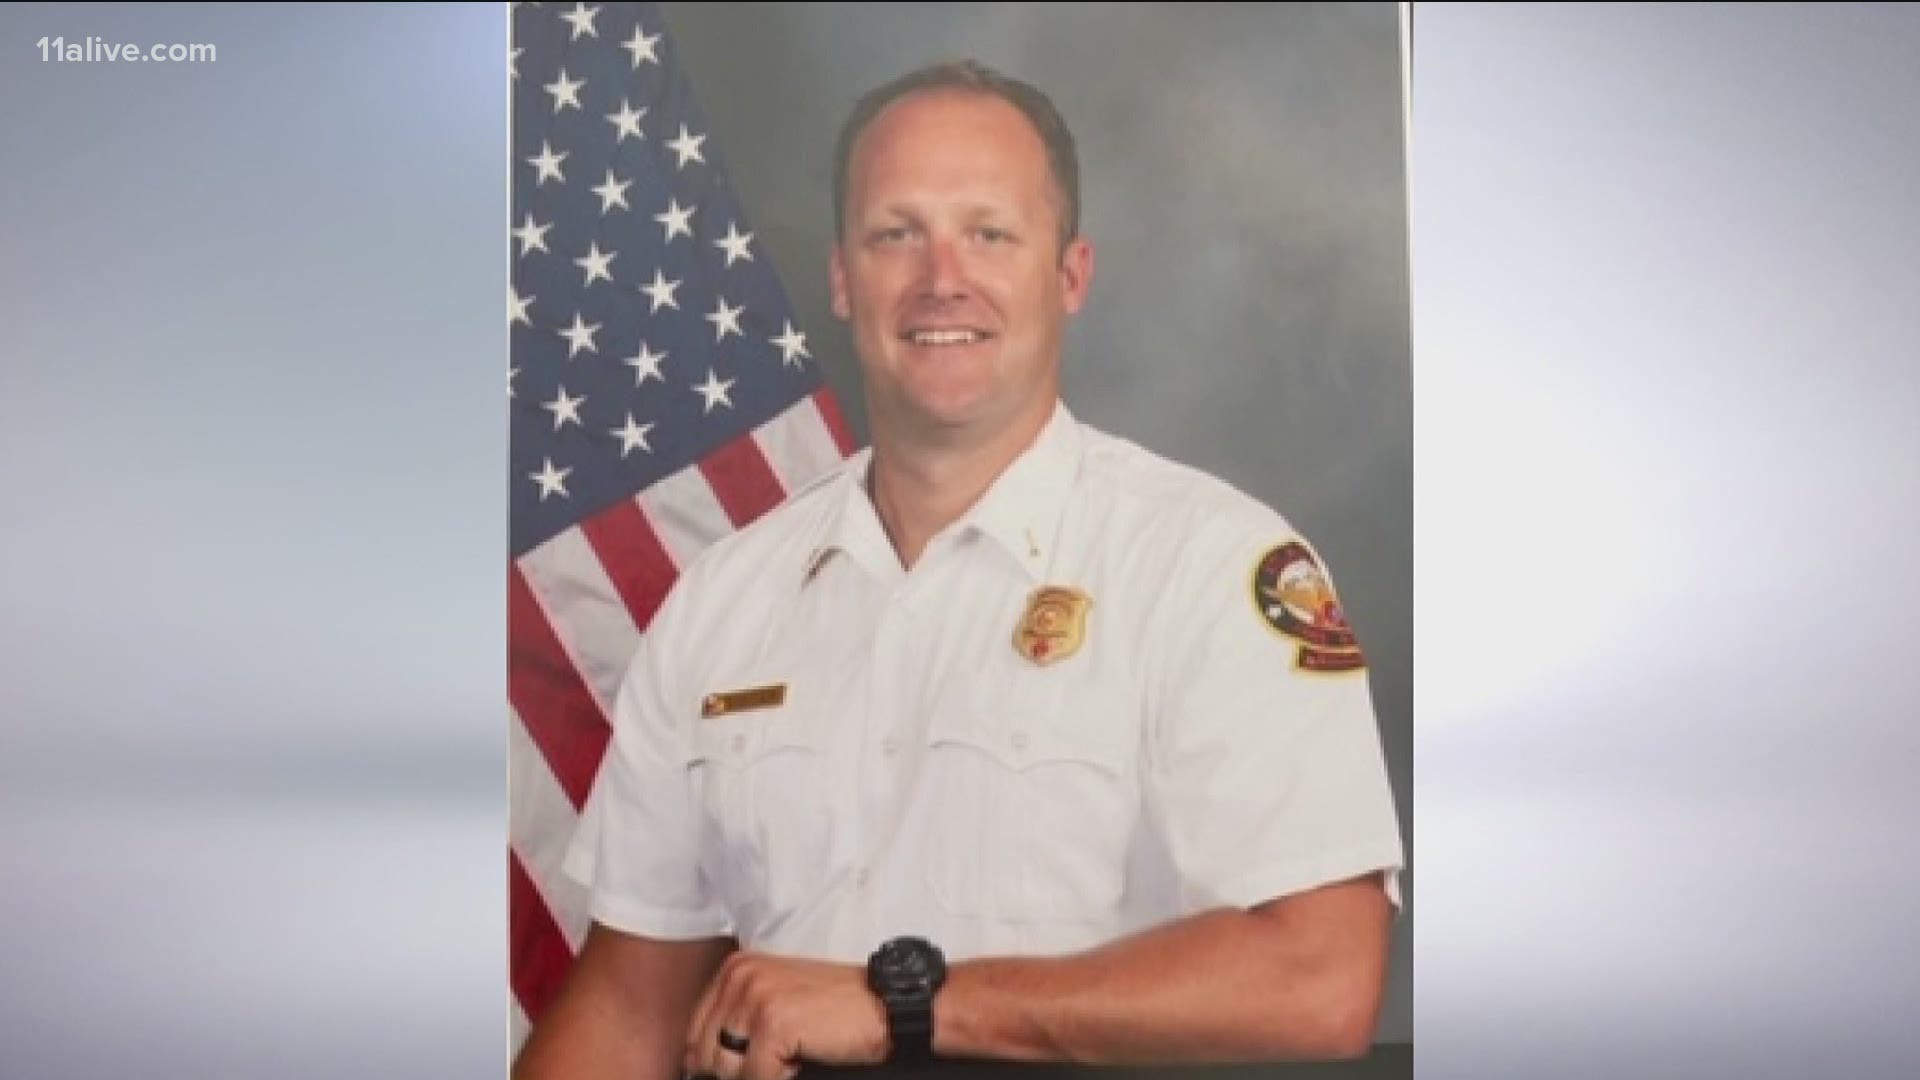 A former Atlanta firefighter who was suspended after entering a burning house alone in an attempt to save a 95-year-old woman has been hired in Johns Creek.